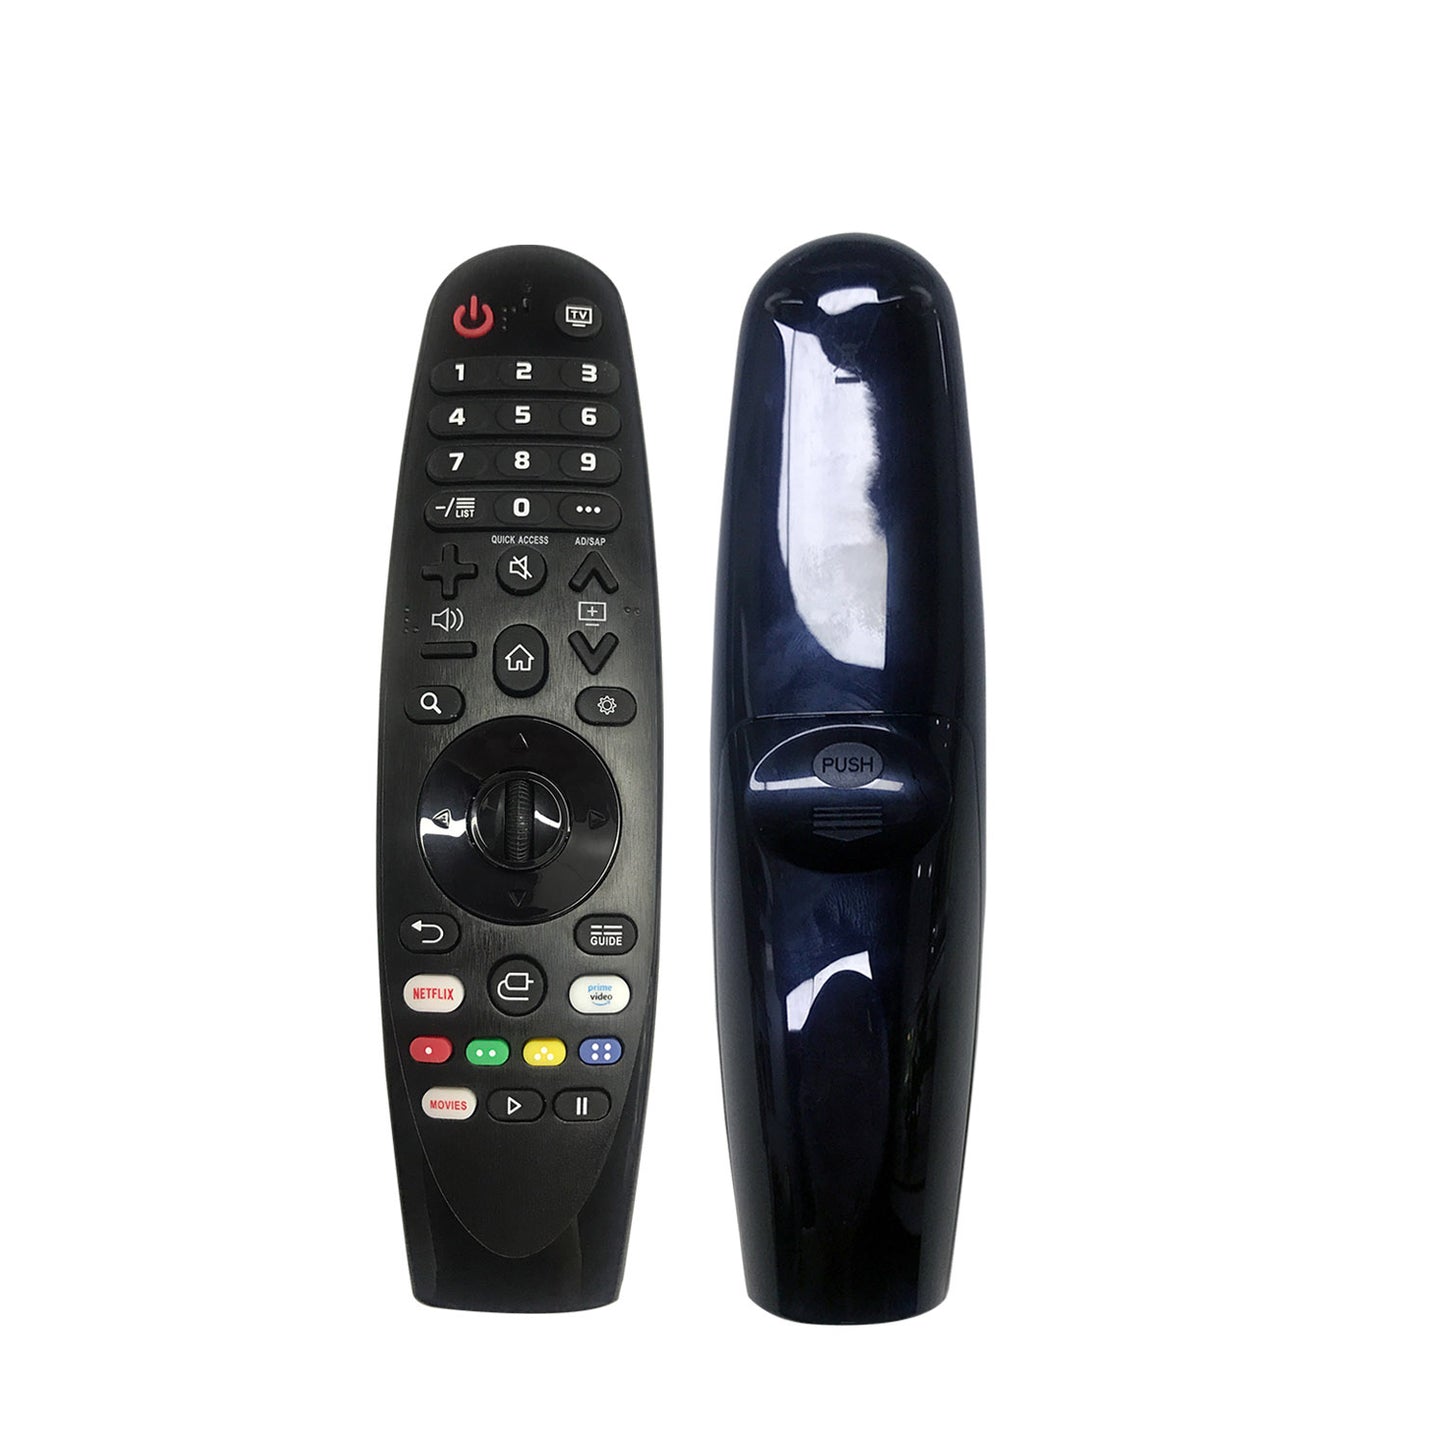 IR-MR20/19 Remote Control For LG 2018-2020 Smart TV, OLED Series, SK/UK Series, AN-MR18/19/20, AN-MR400/500/600/650/700 (No Voice Input, No Pointer)